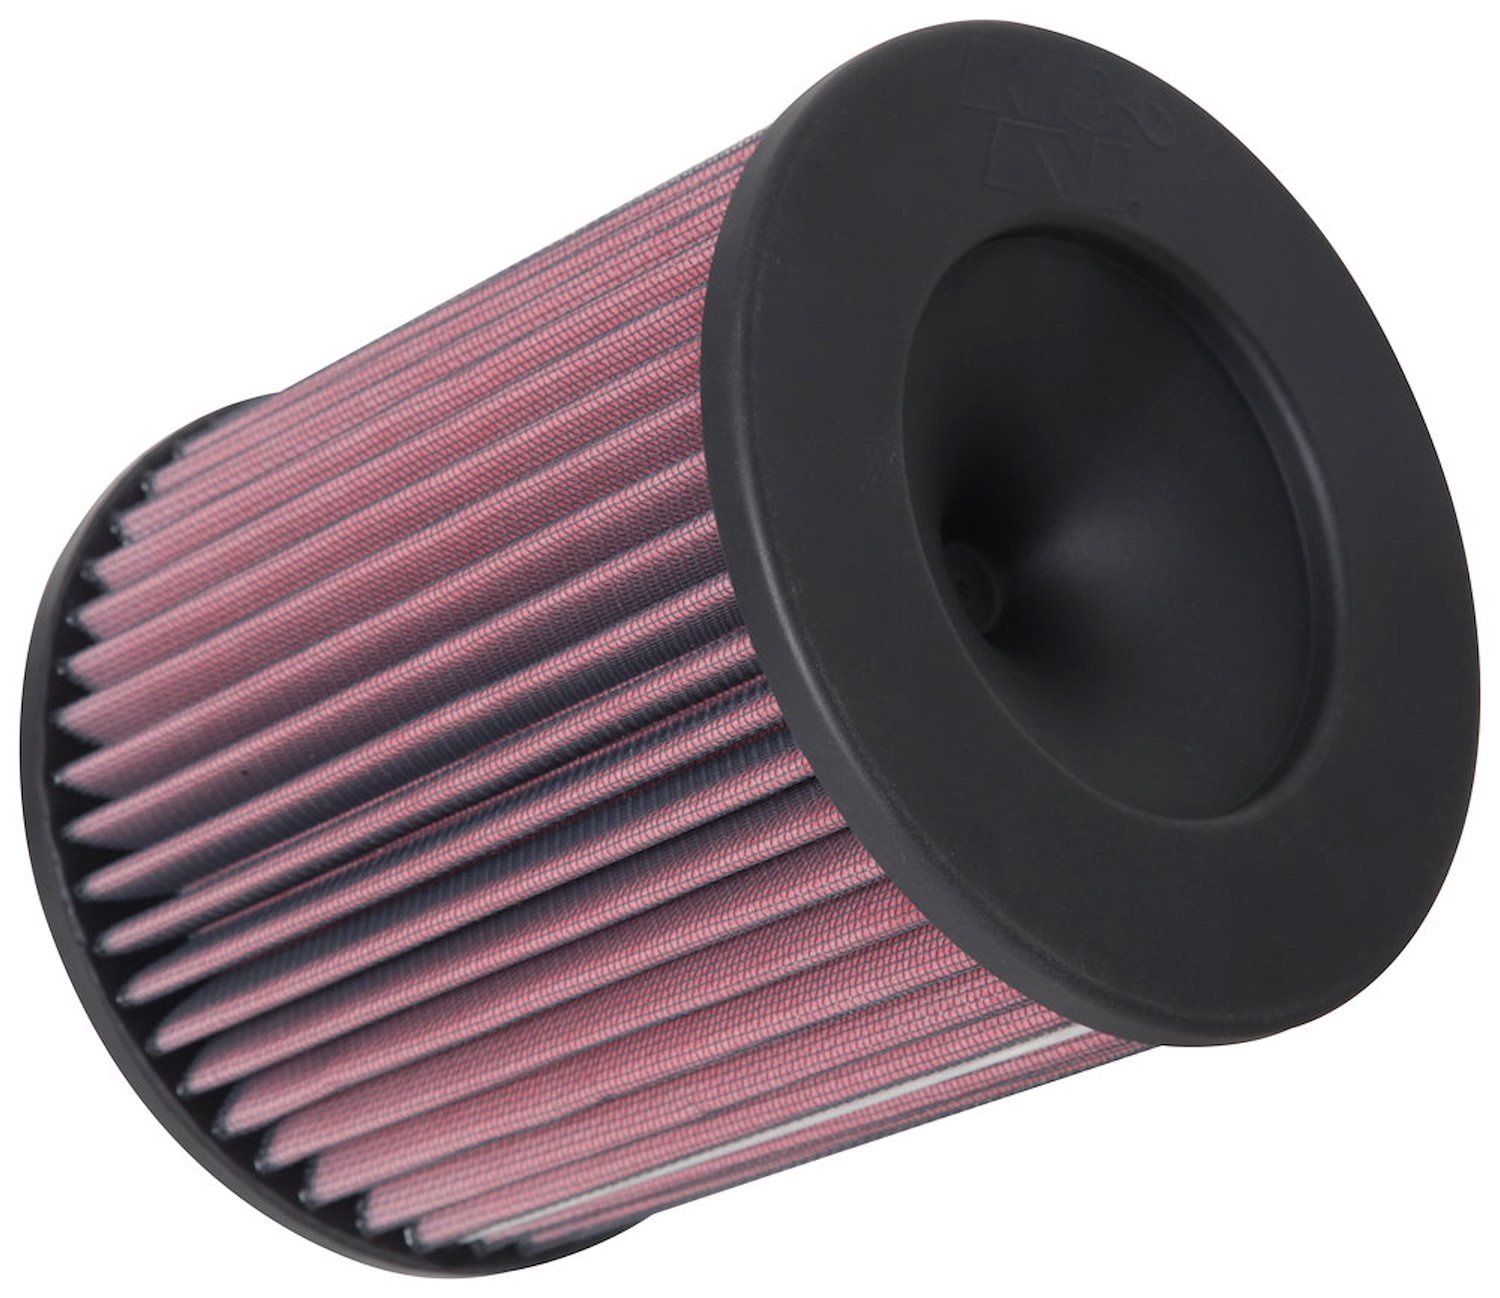 High-Performance OE-Style Replacement Filter Audi A8 3.0L V6 Fuel Injection/Diesel